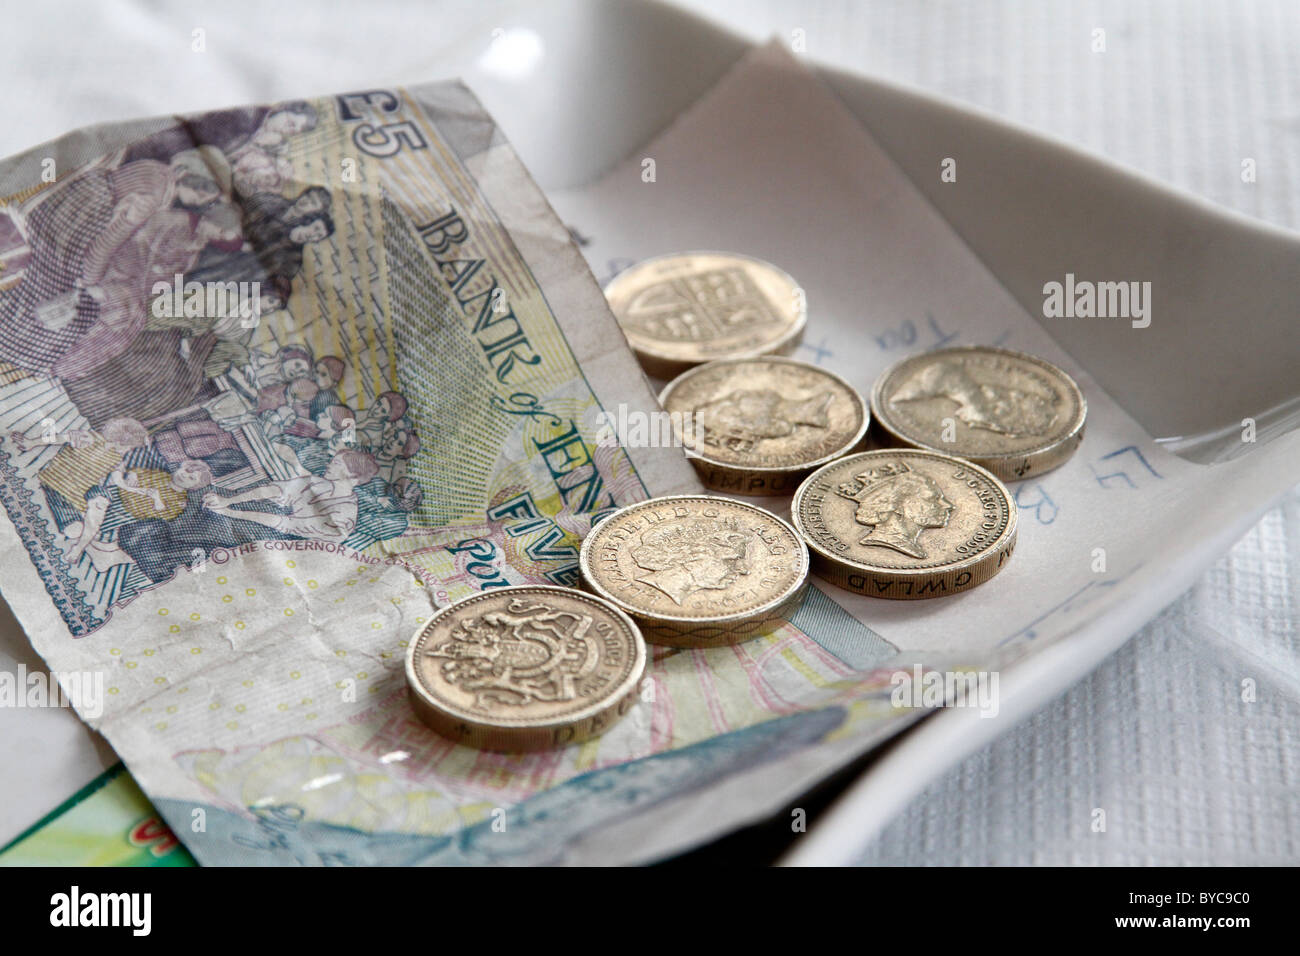 UK. MONEY TO PAY FOR RESTAURANT BILL IN LONDON Stock Photo